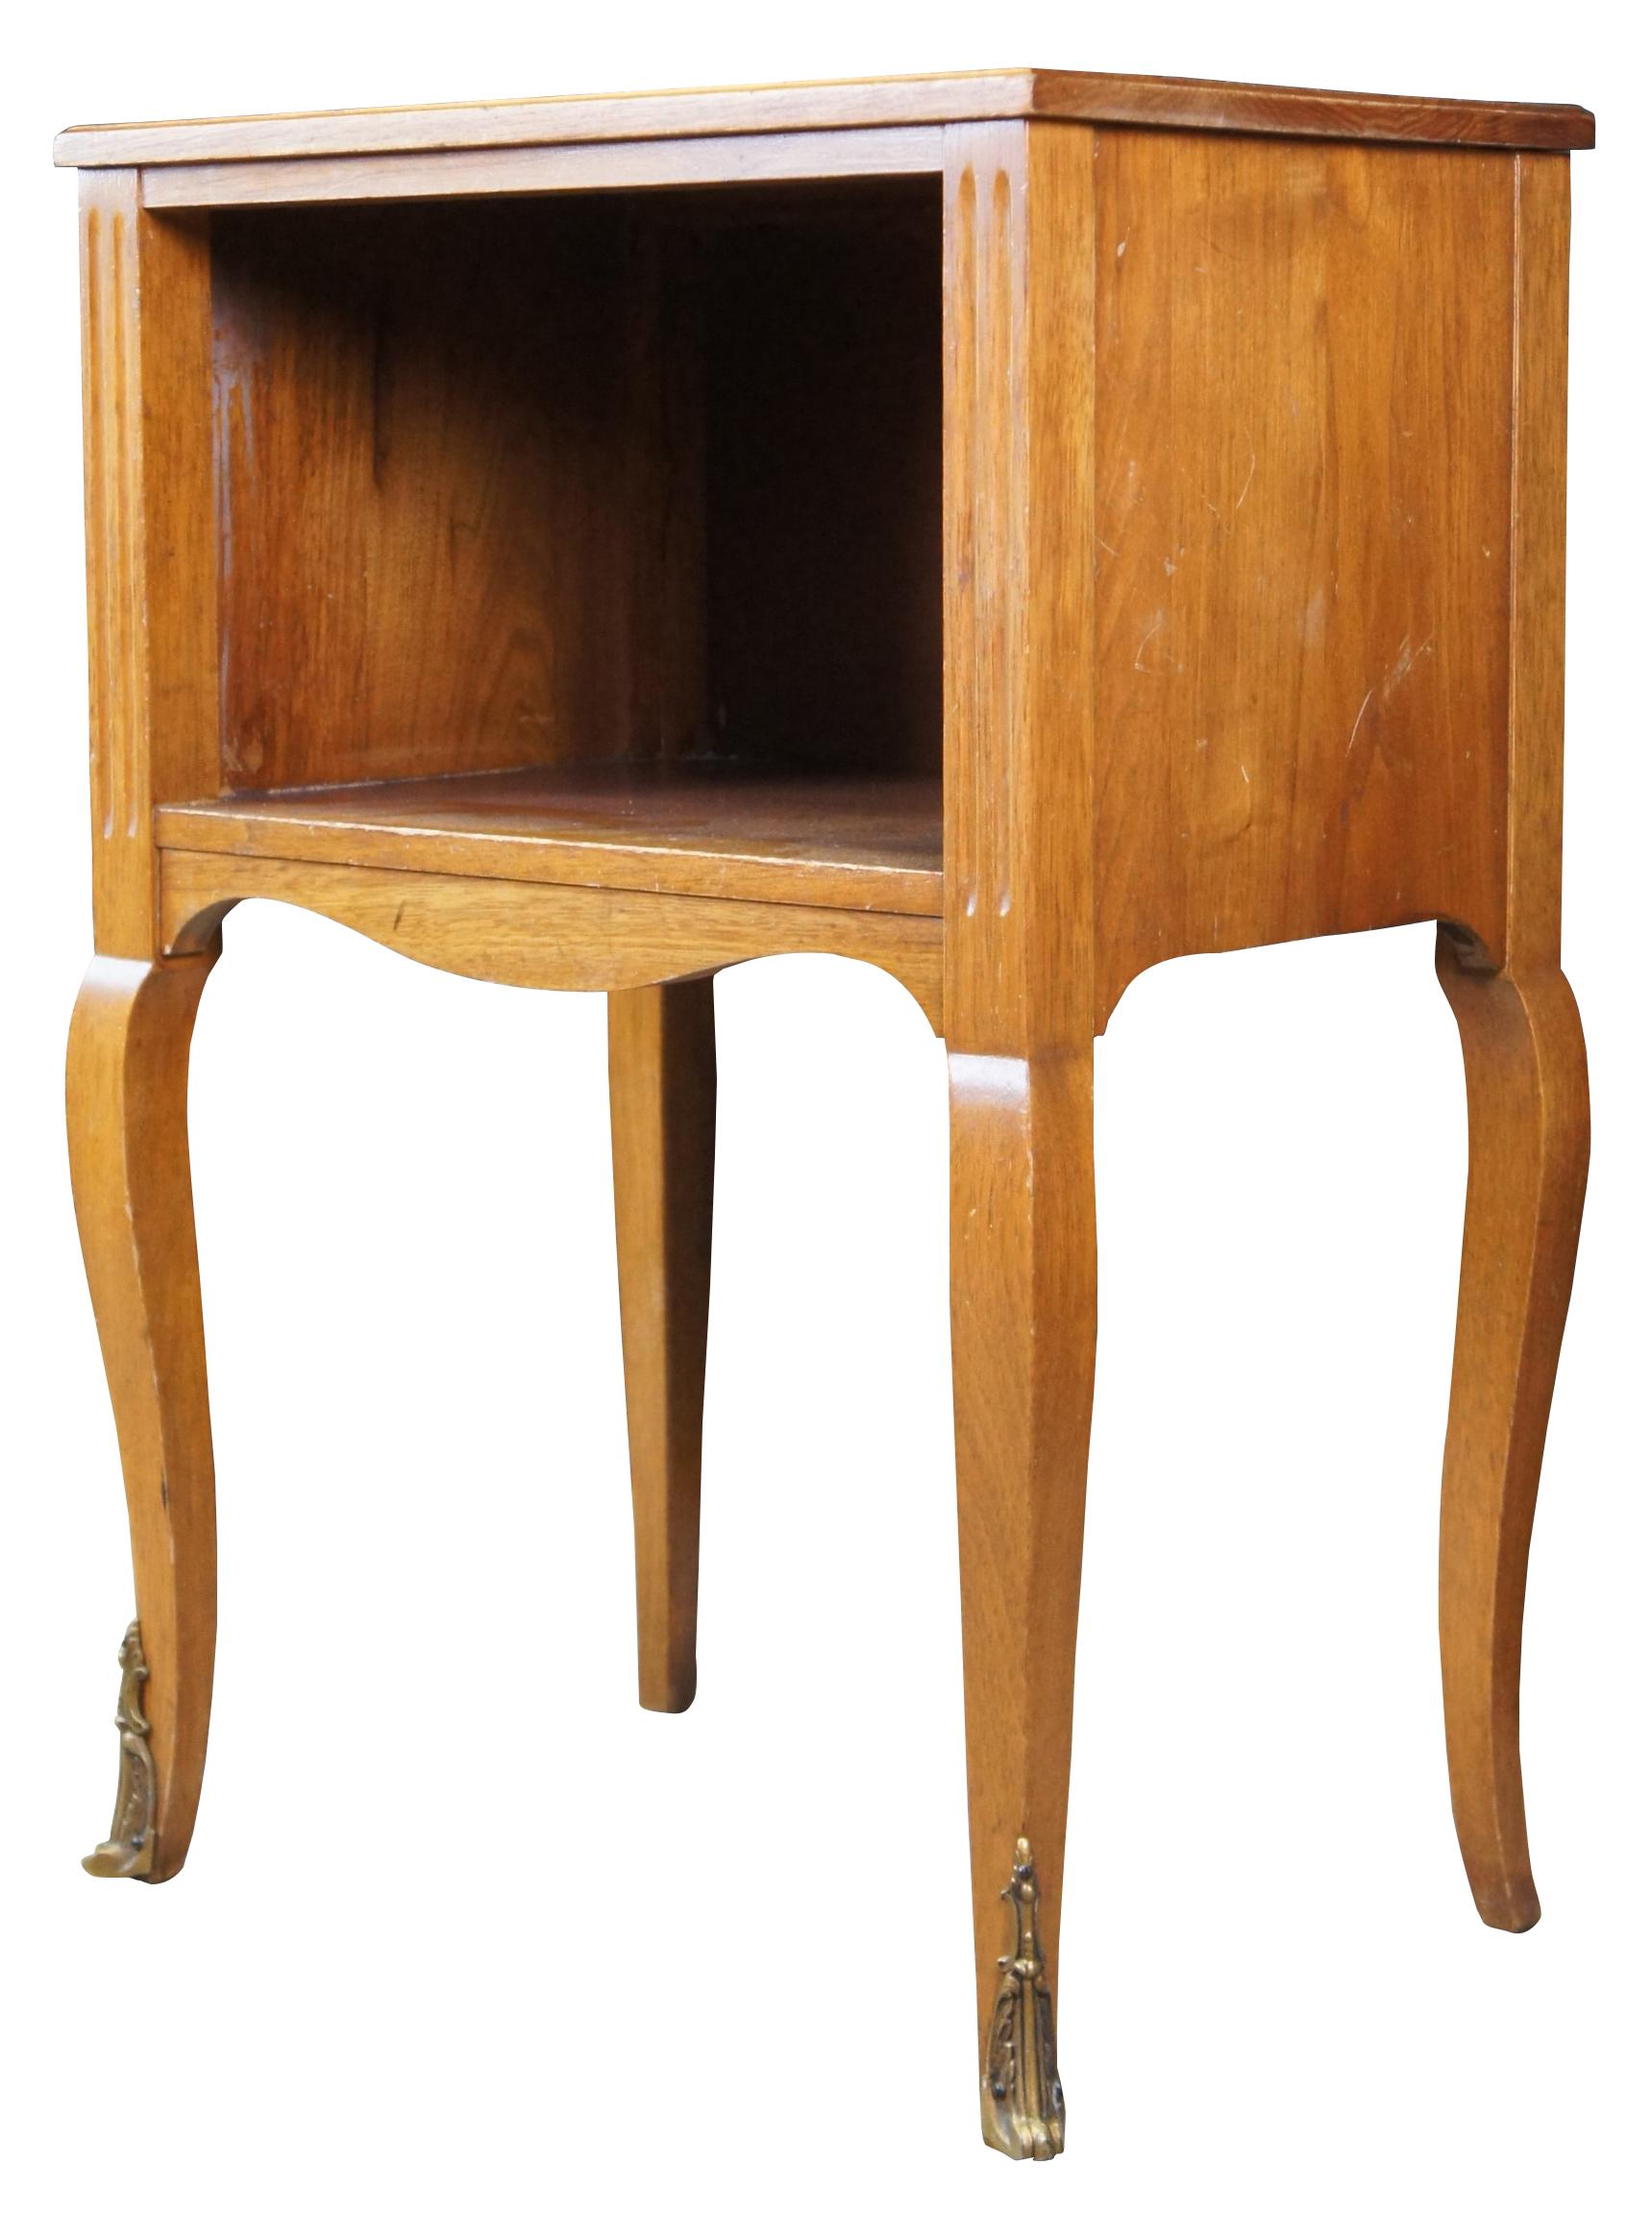 Antique Robert W Irwin Louis XV French Walnut Bedside End Table Nightstand  In Good Condition For Sale In Dayton, OH